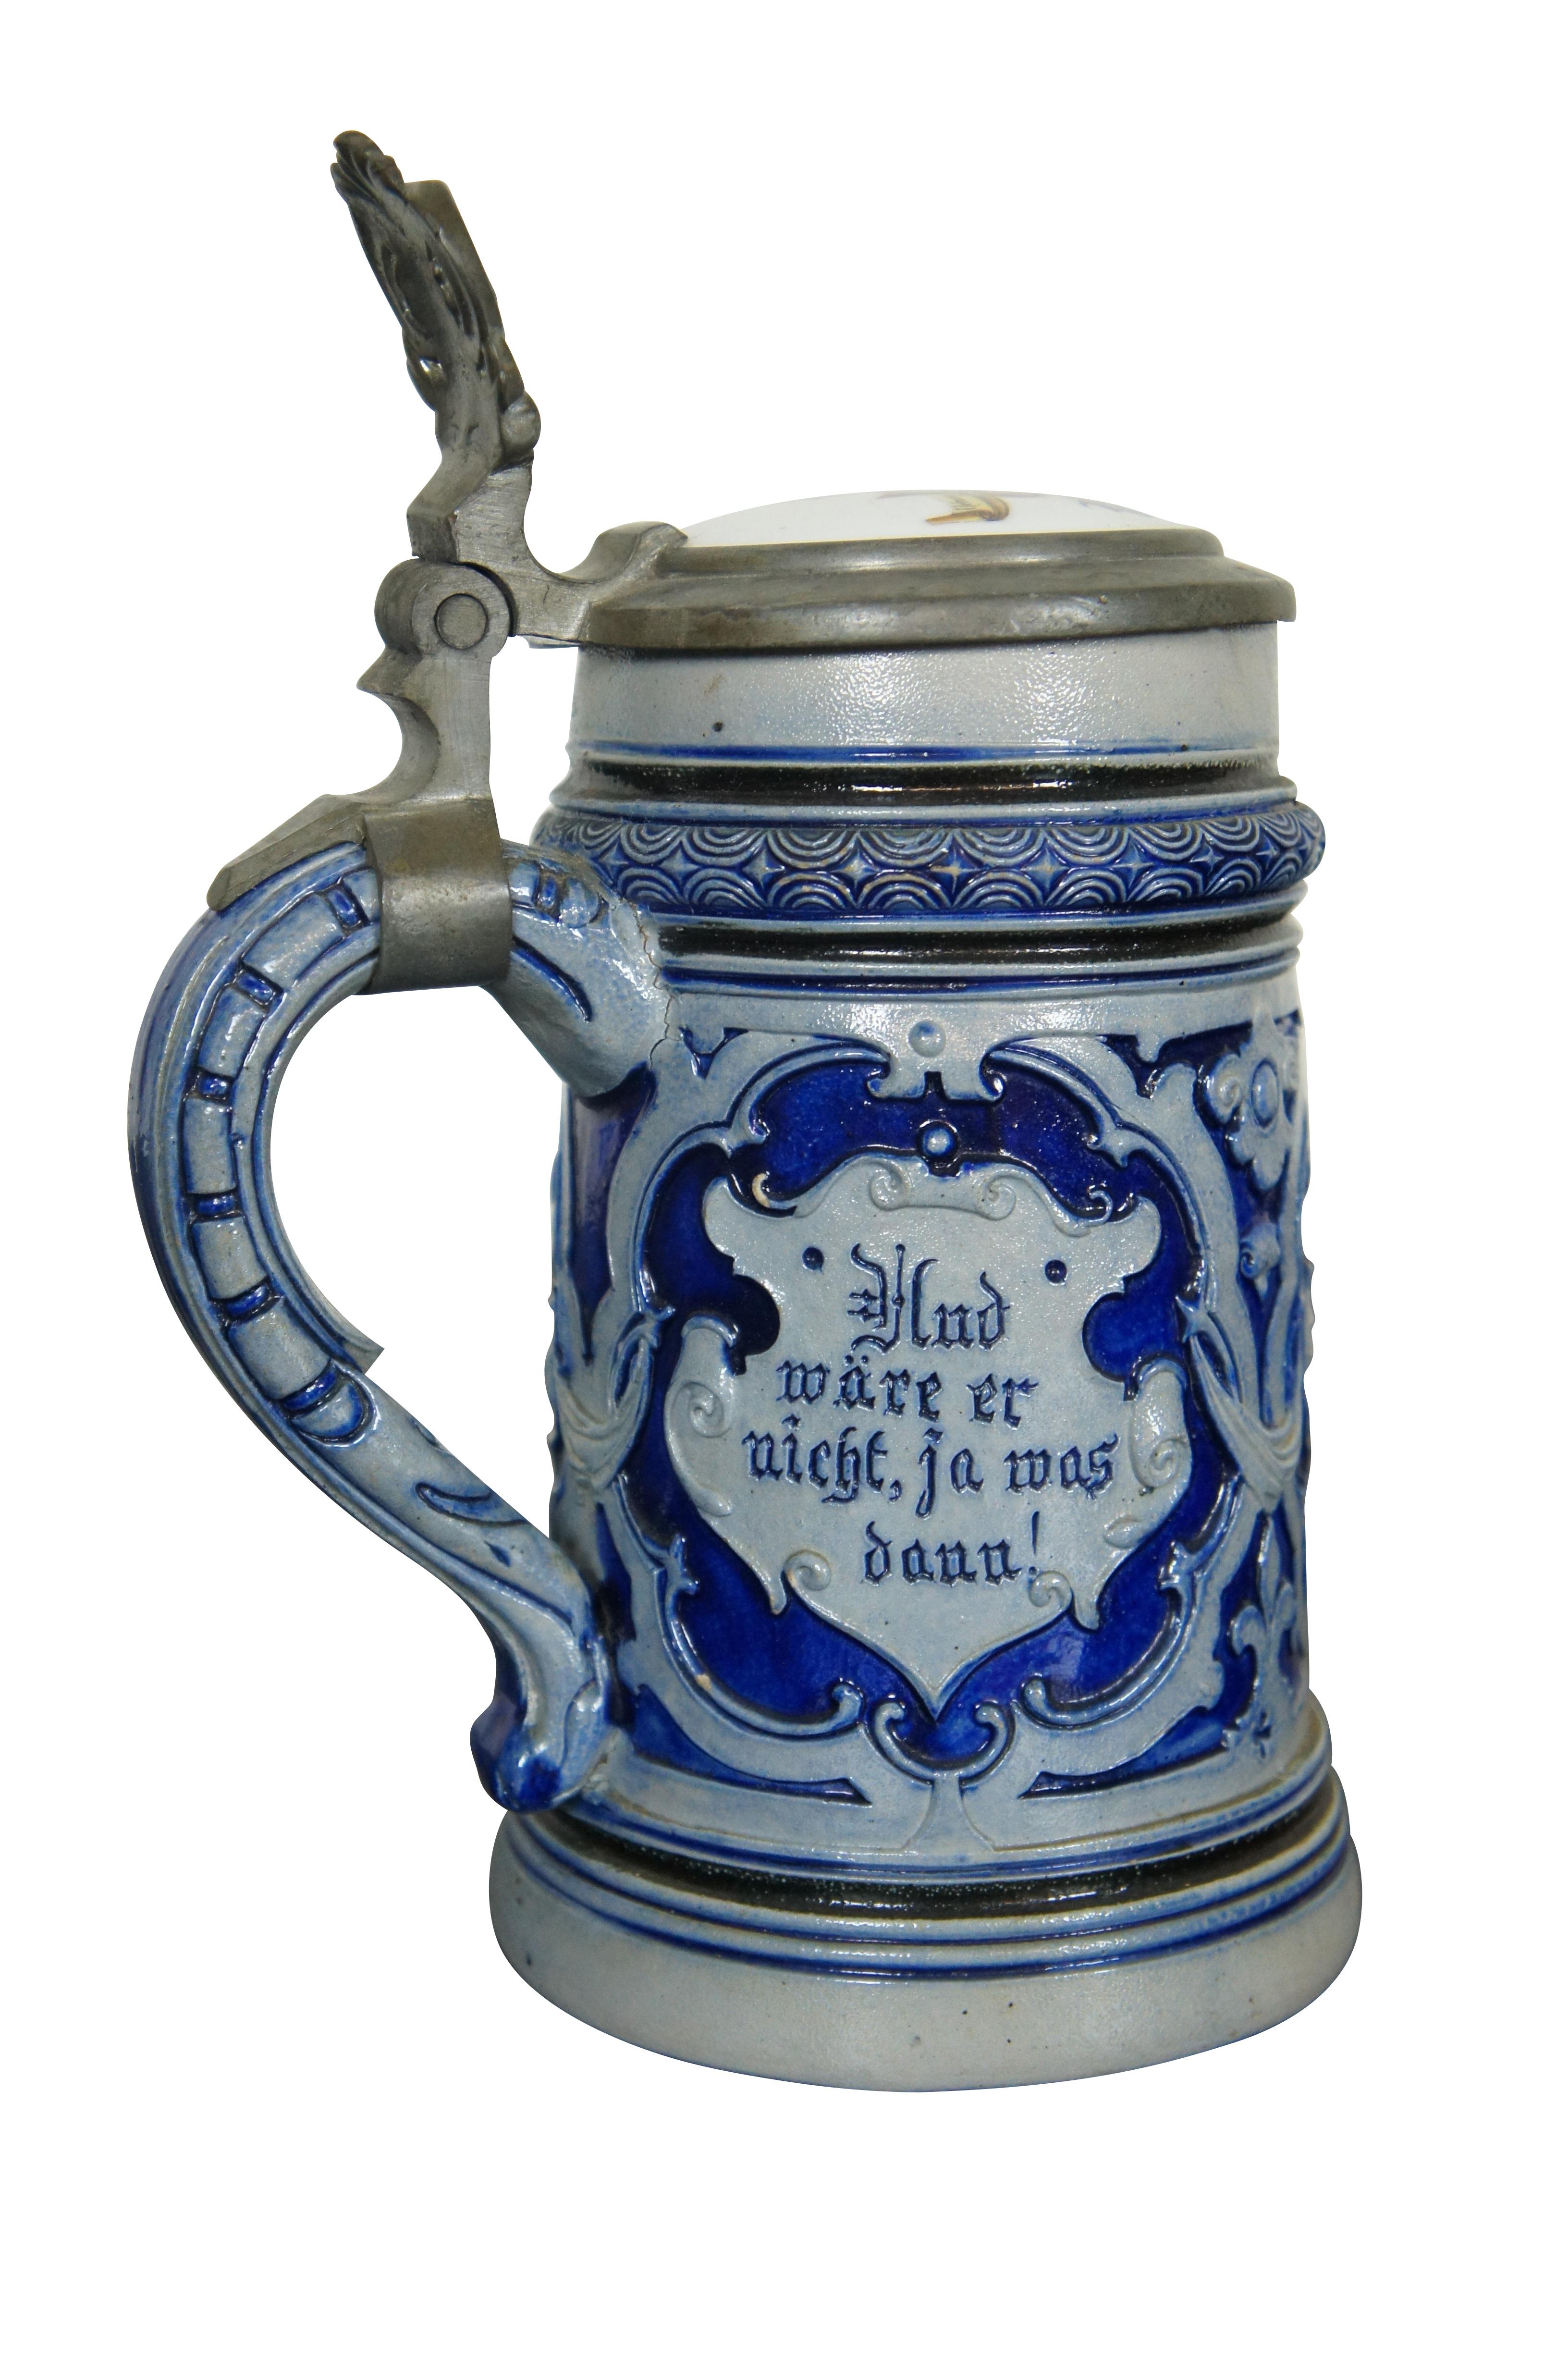 Vintage German beer stein and plaque.  The beer stein features cobalt blue salt glaze with porcelain and pewter lid, heraldic shield / crest with the text: Hud ware er nicht, ja was dann! / Der Durst ist ein grosser Tyran.  Loosely translated to he